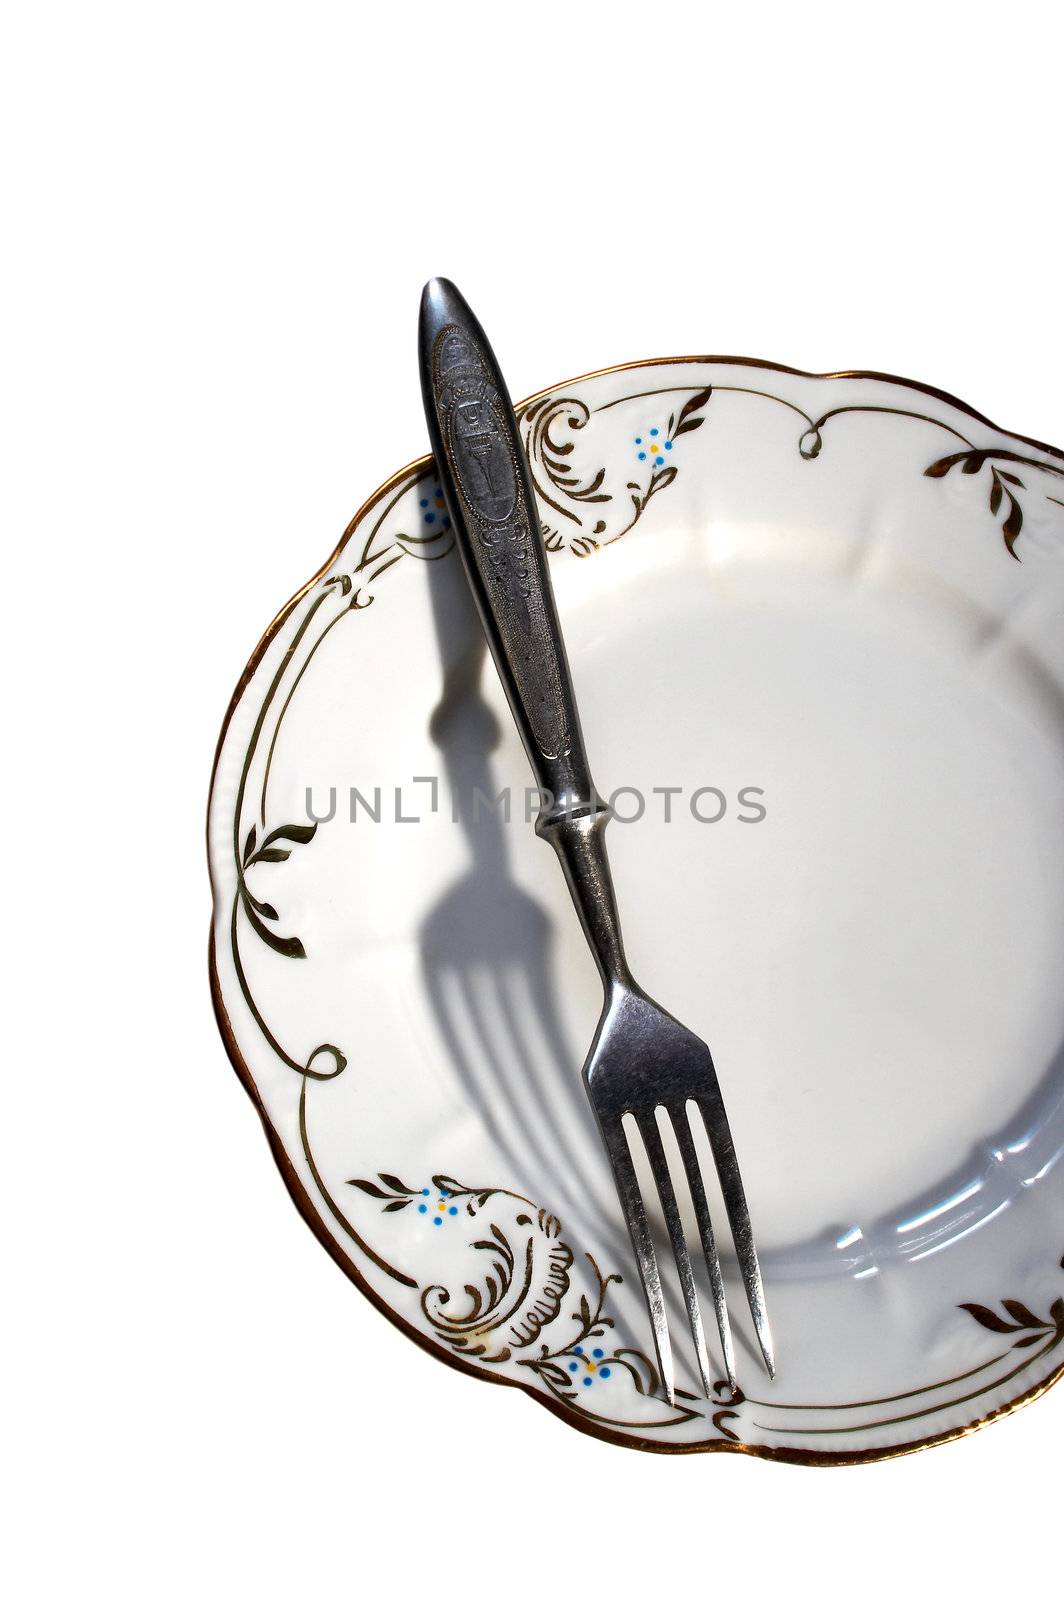 Plate and fork on a white background